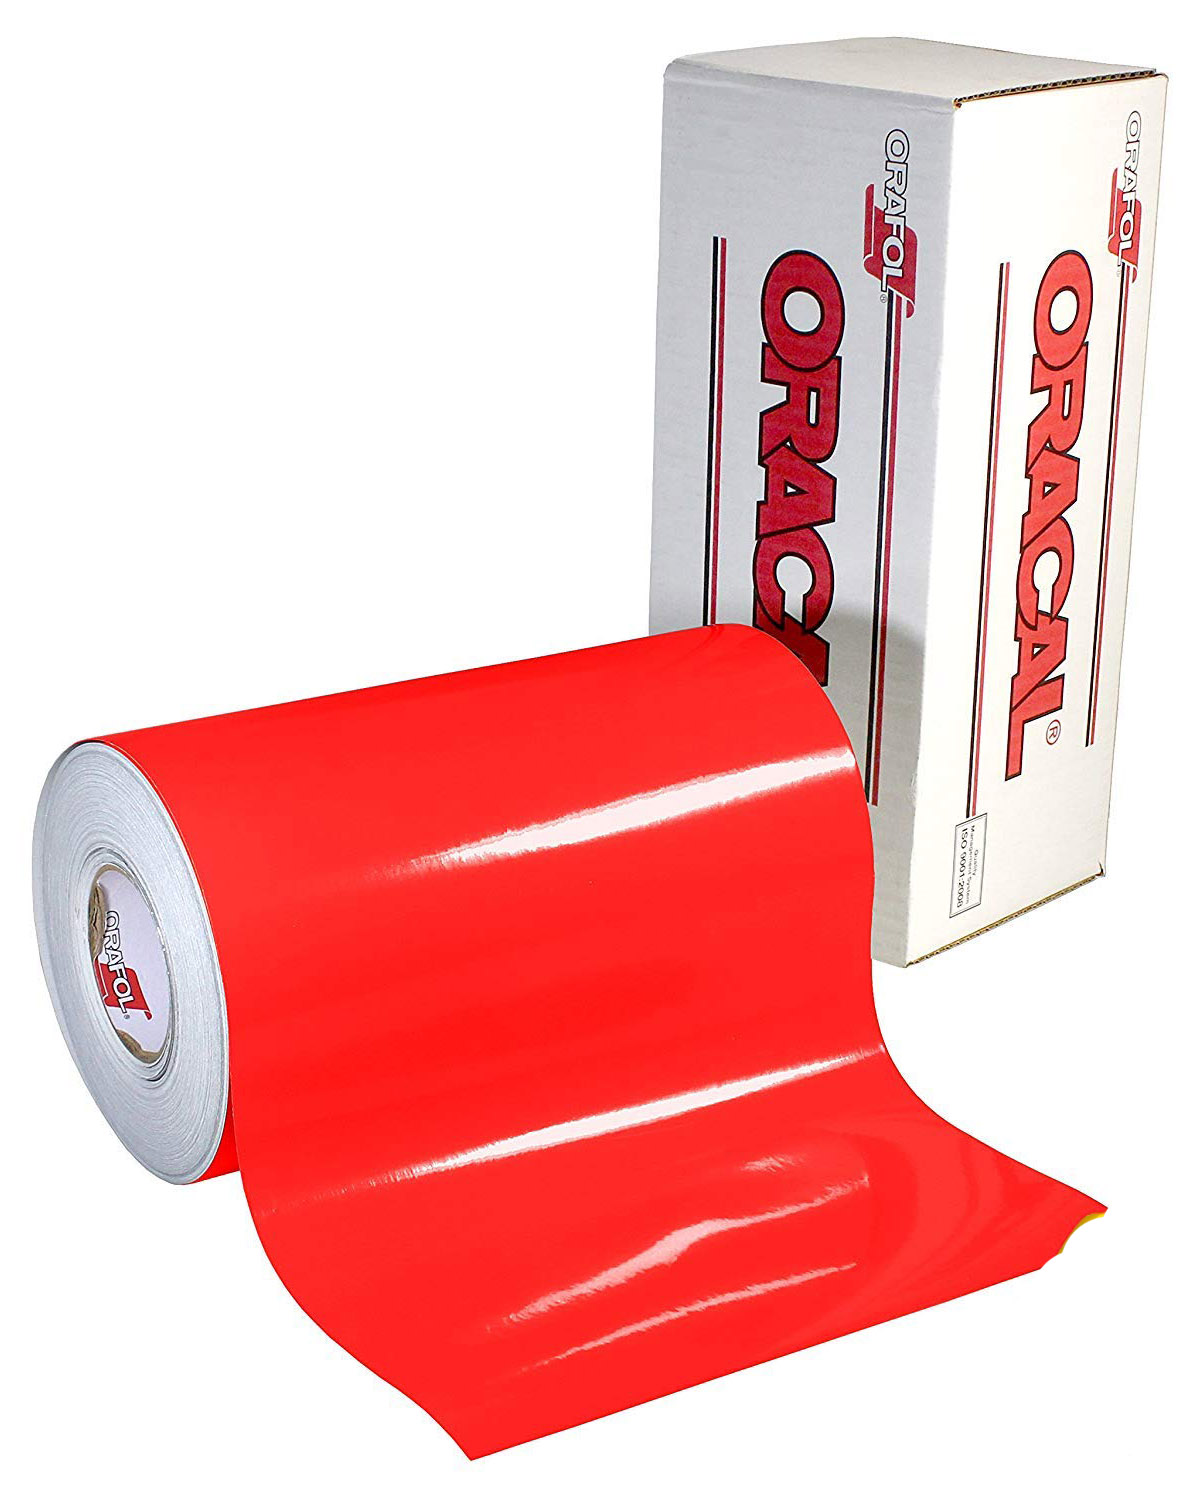 24IN RED 6510 FLUORESCENT CAST - Oracal 6510 Fluorescent Cast PVC Film